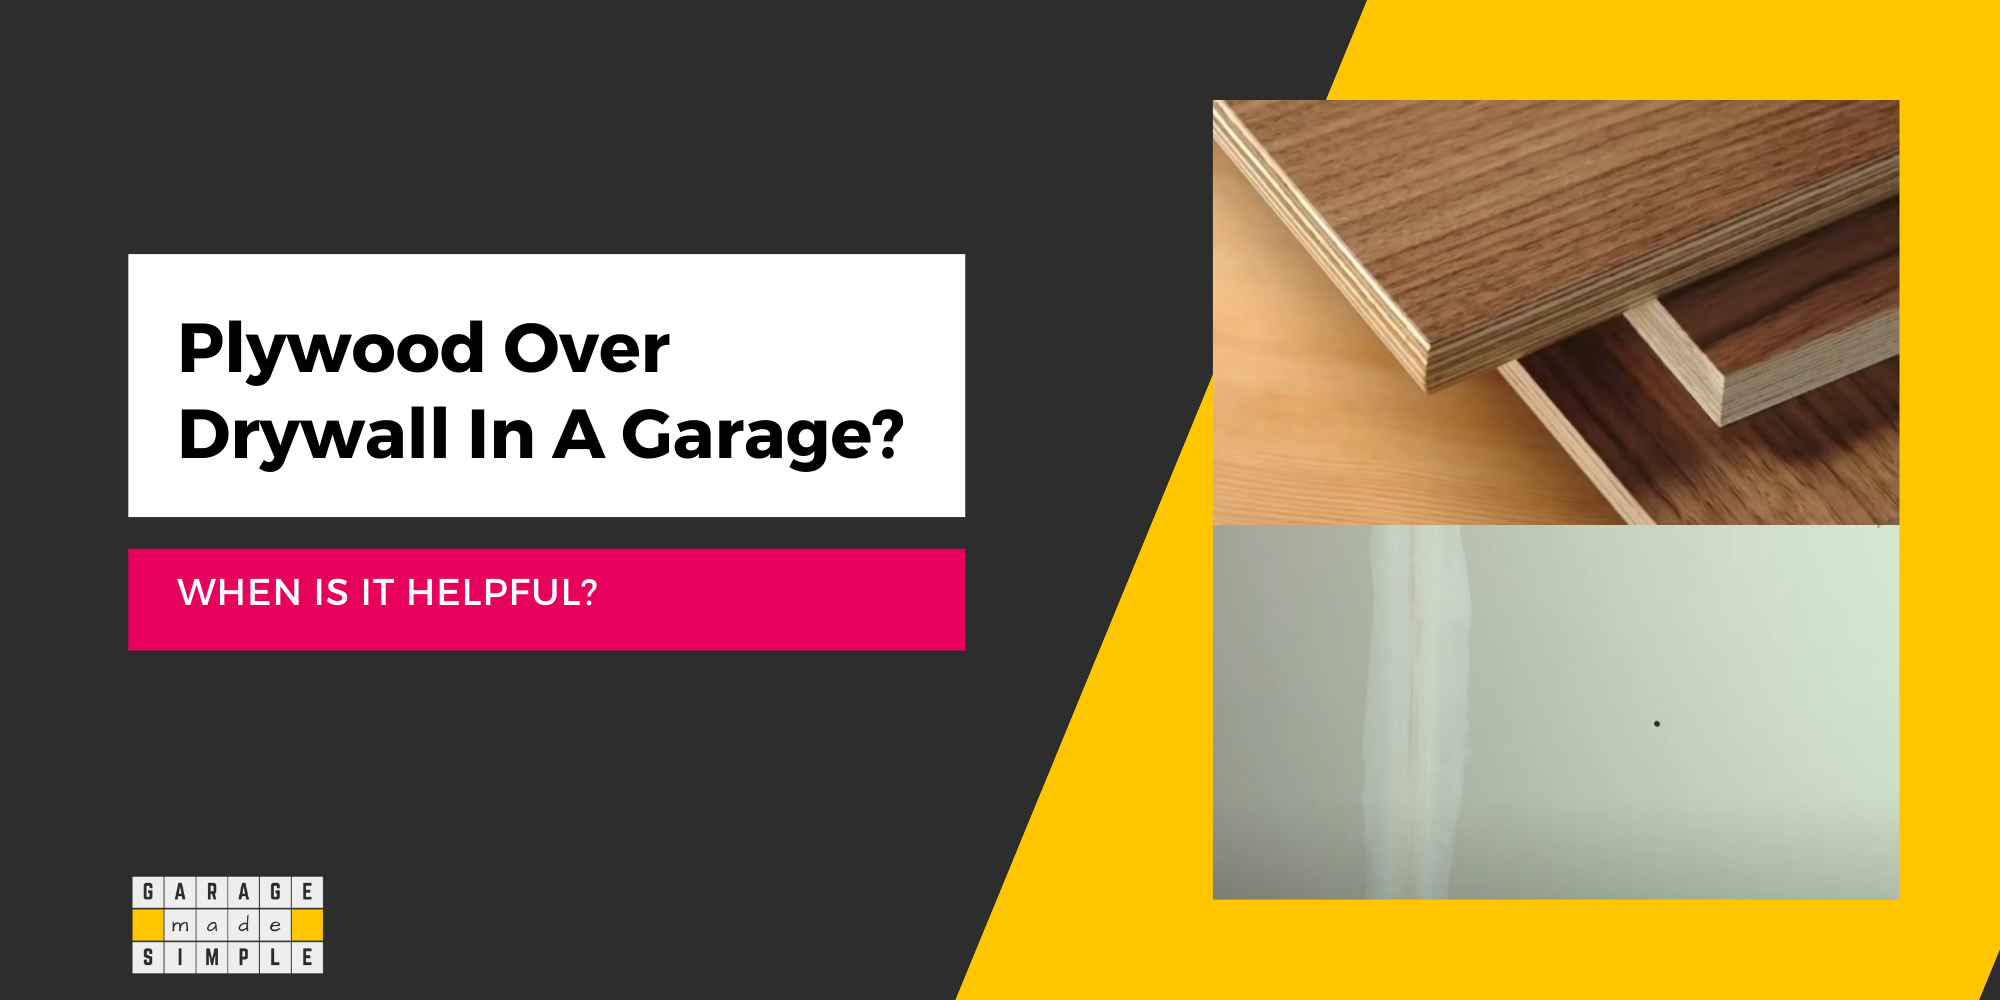 Is Plywood Over Drywall In The Garage Helpful? (Find Out!)